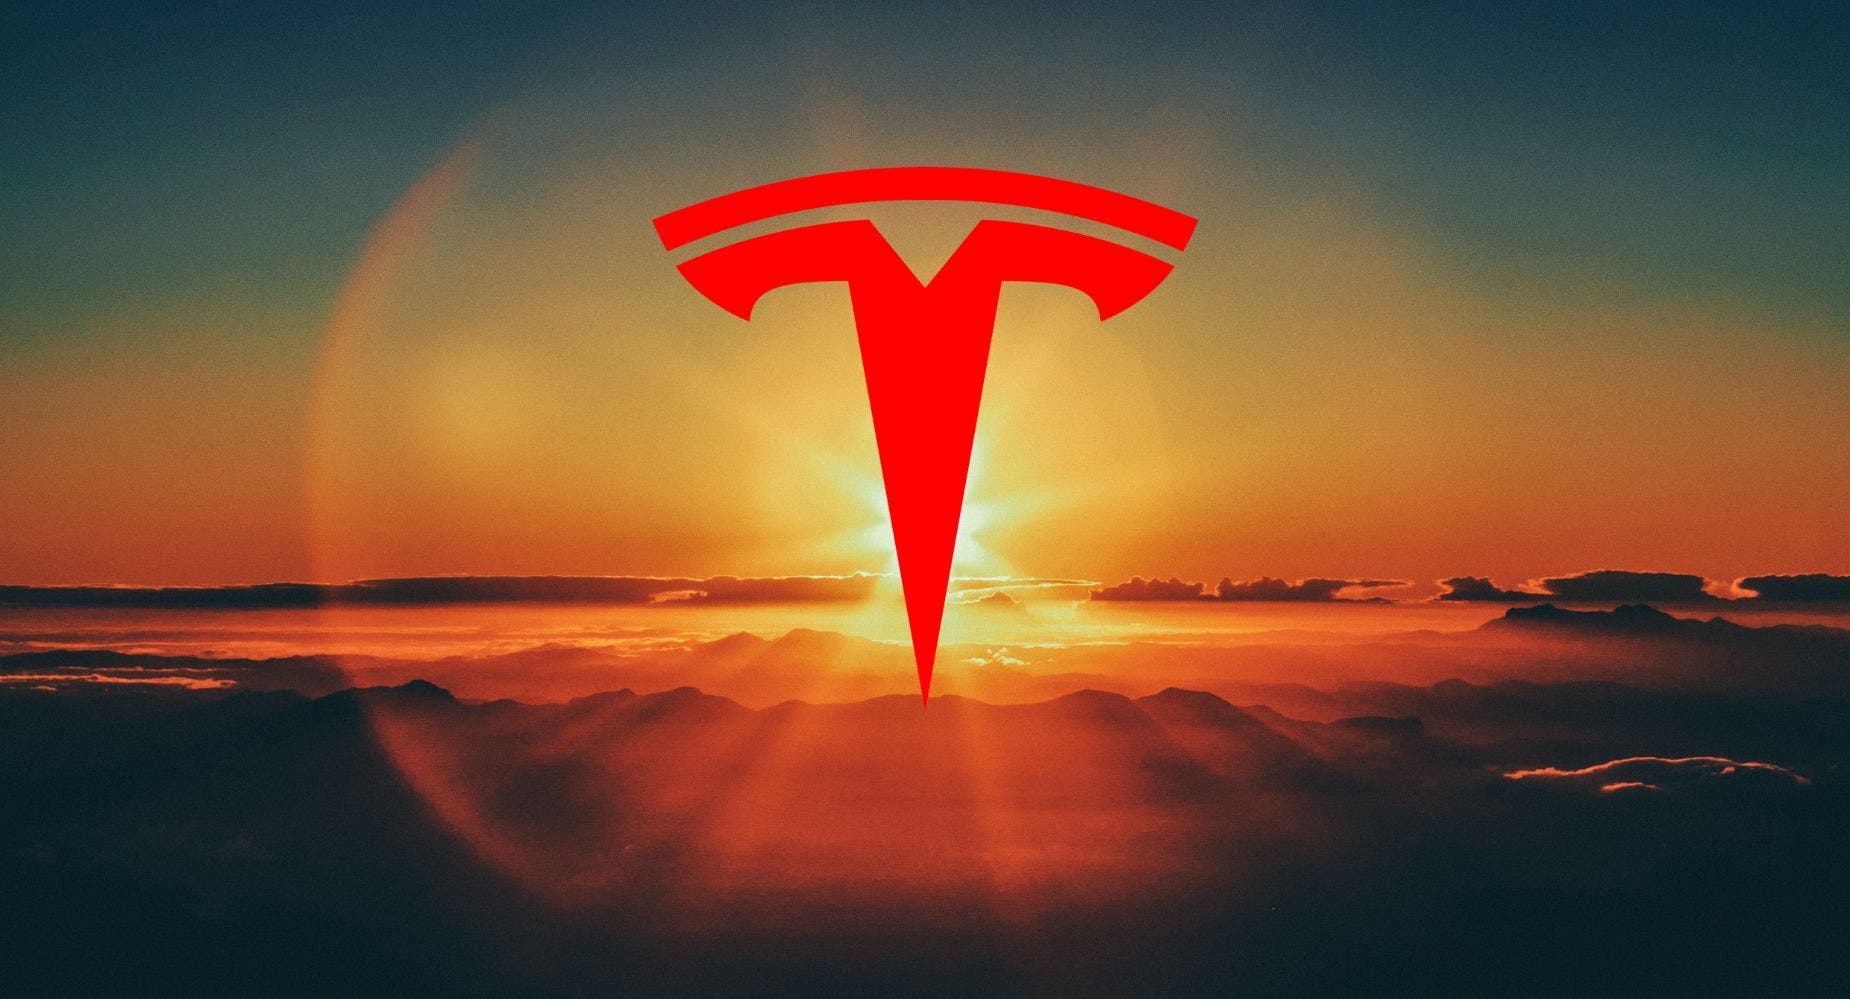 Tesla Stock Jumped 80% During The 2020 Share Split. What May Happen This Time, According To One Analyst